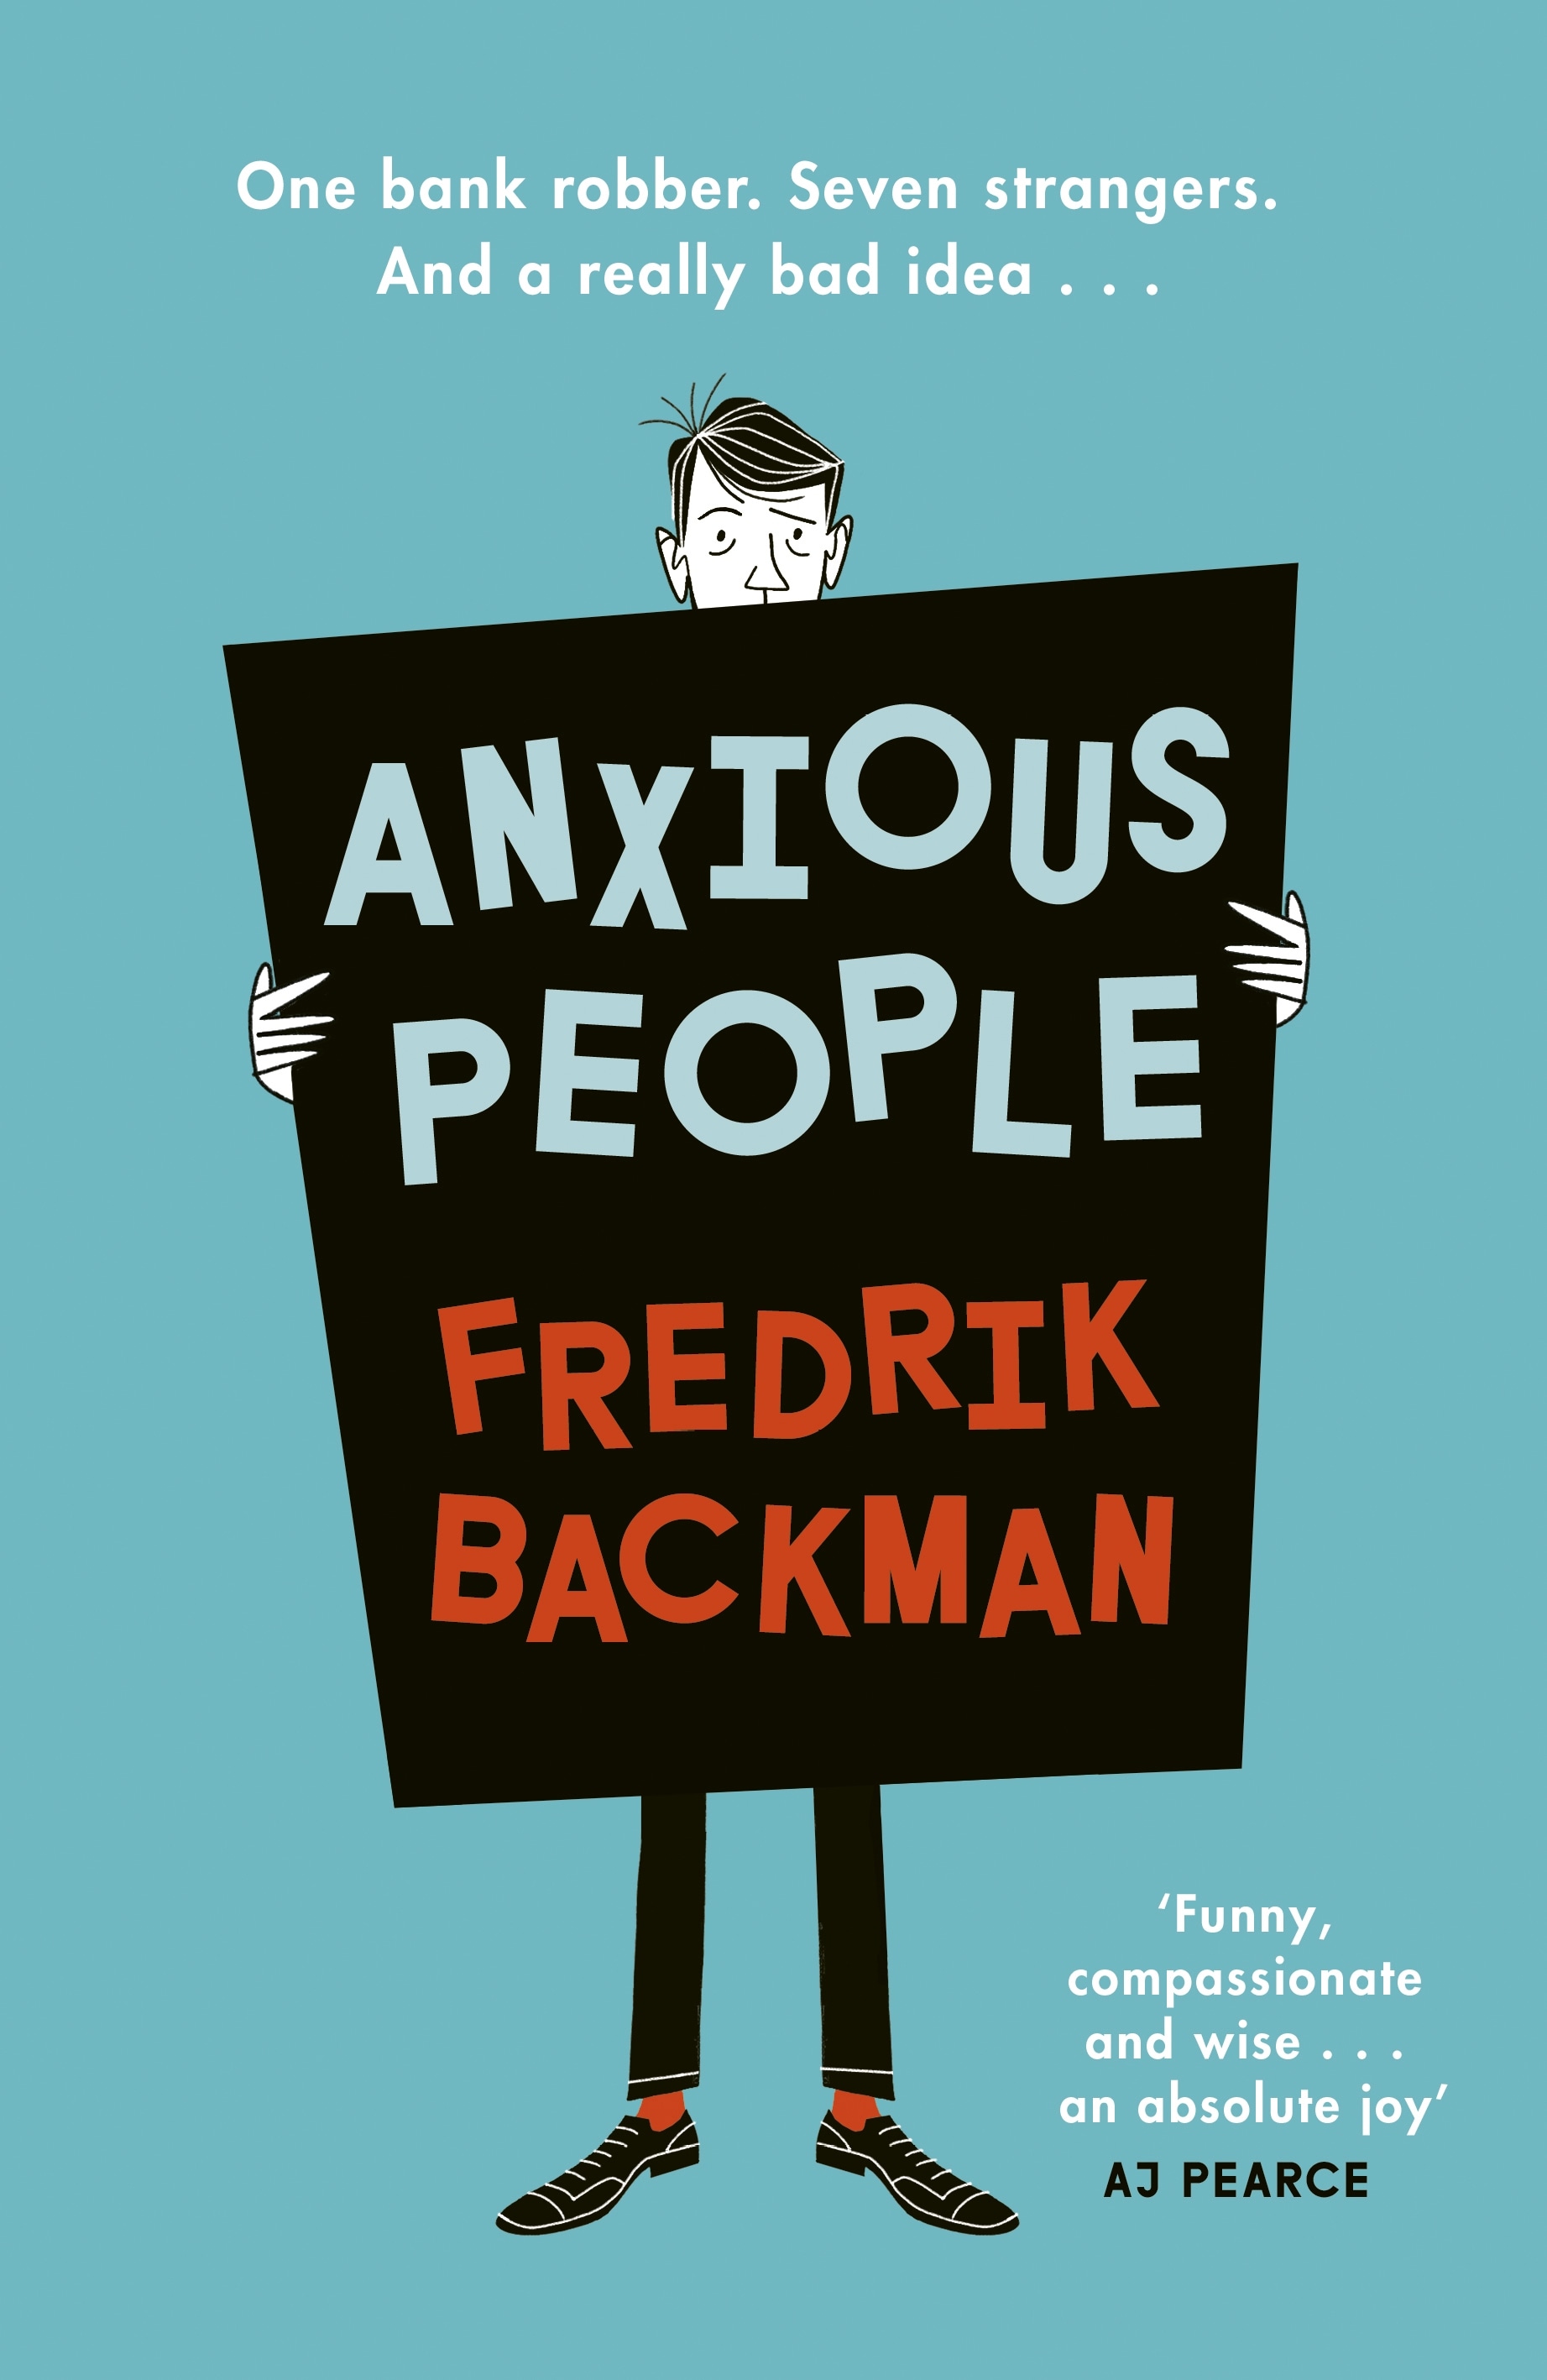 Book “Anxious People” by Fredrik Backman — August 20, 2020